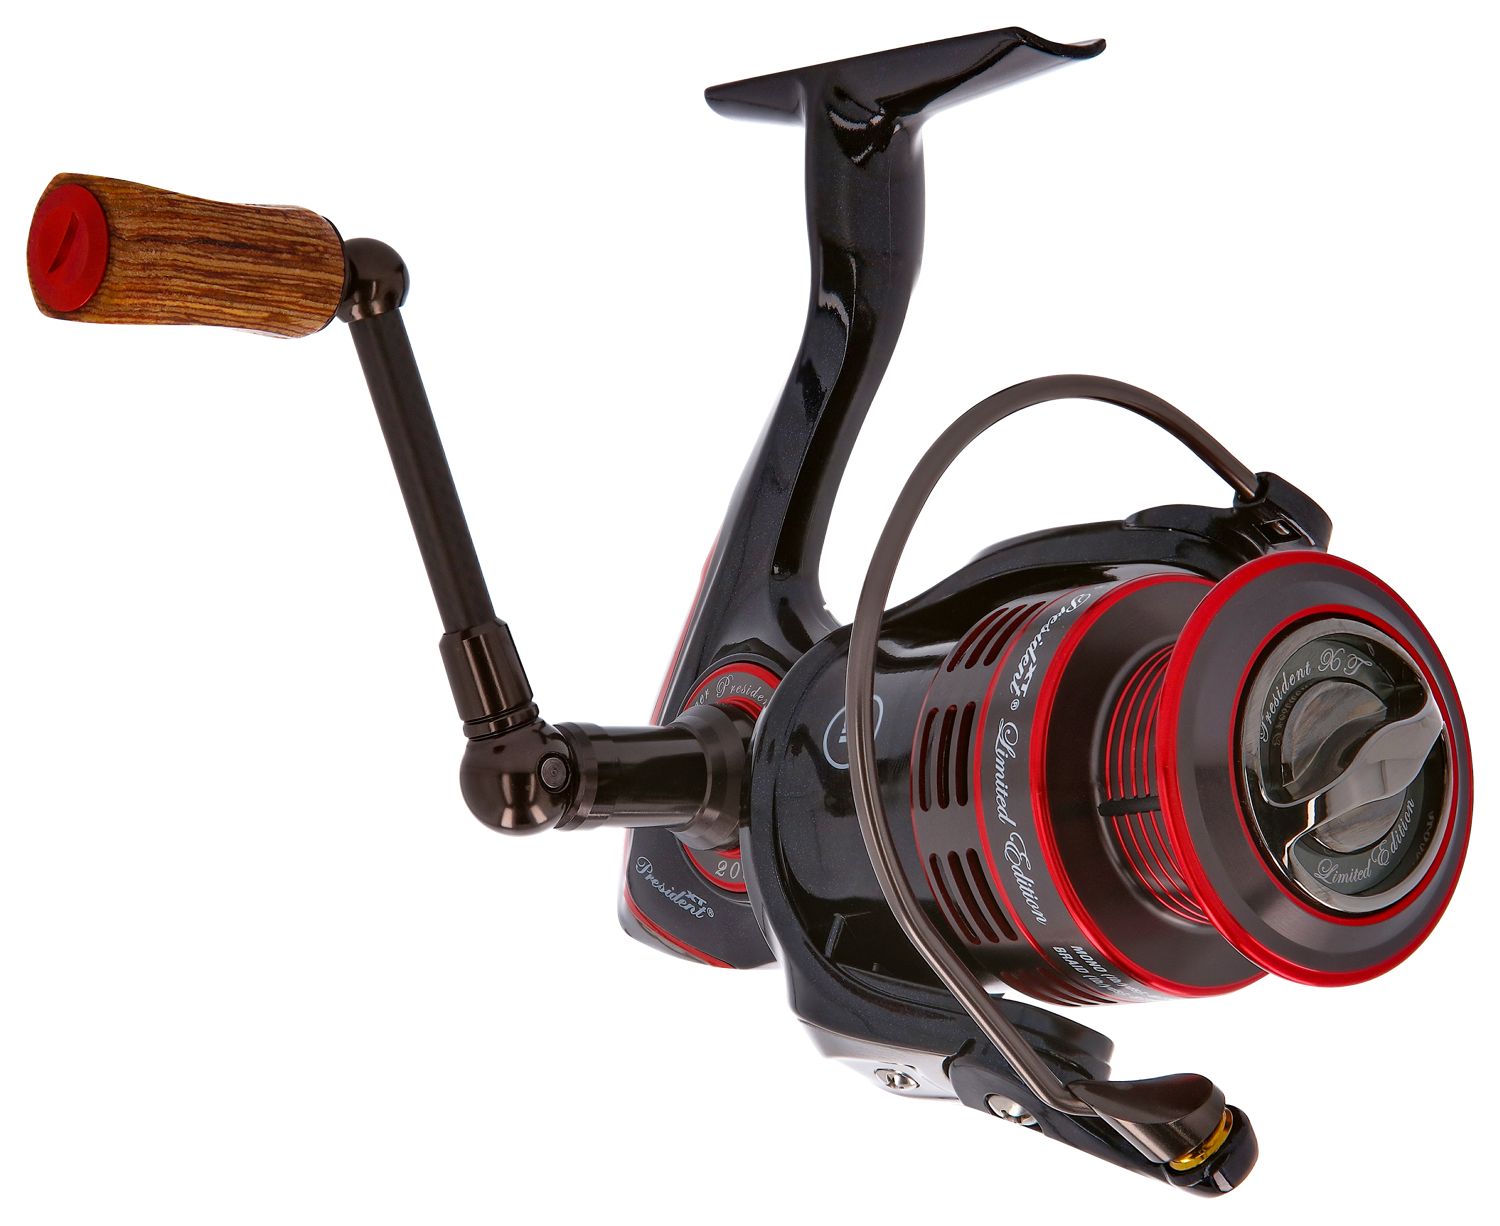 Walmart's Saltwater Sealed Reel From Ozark Trail Features Review